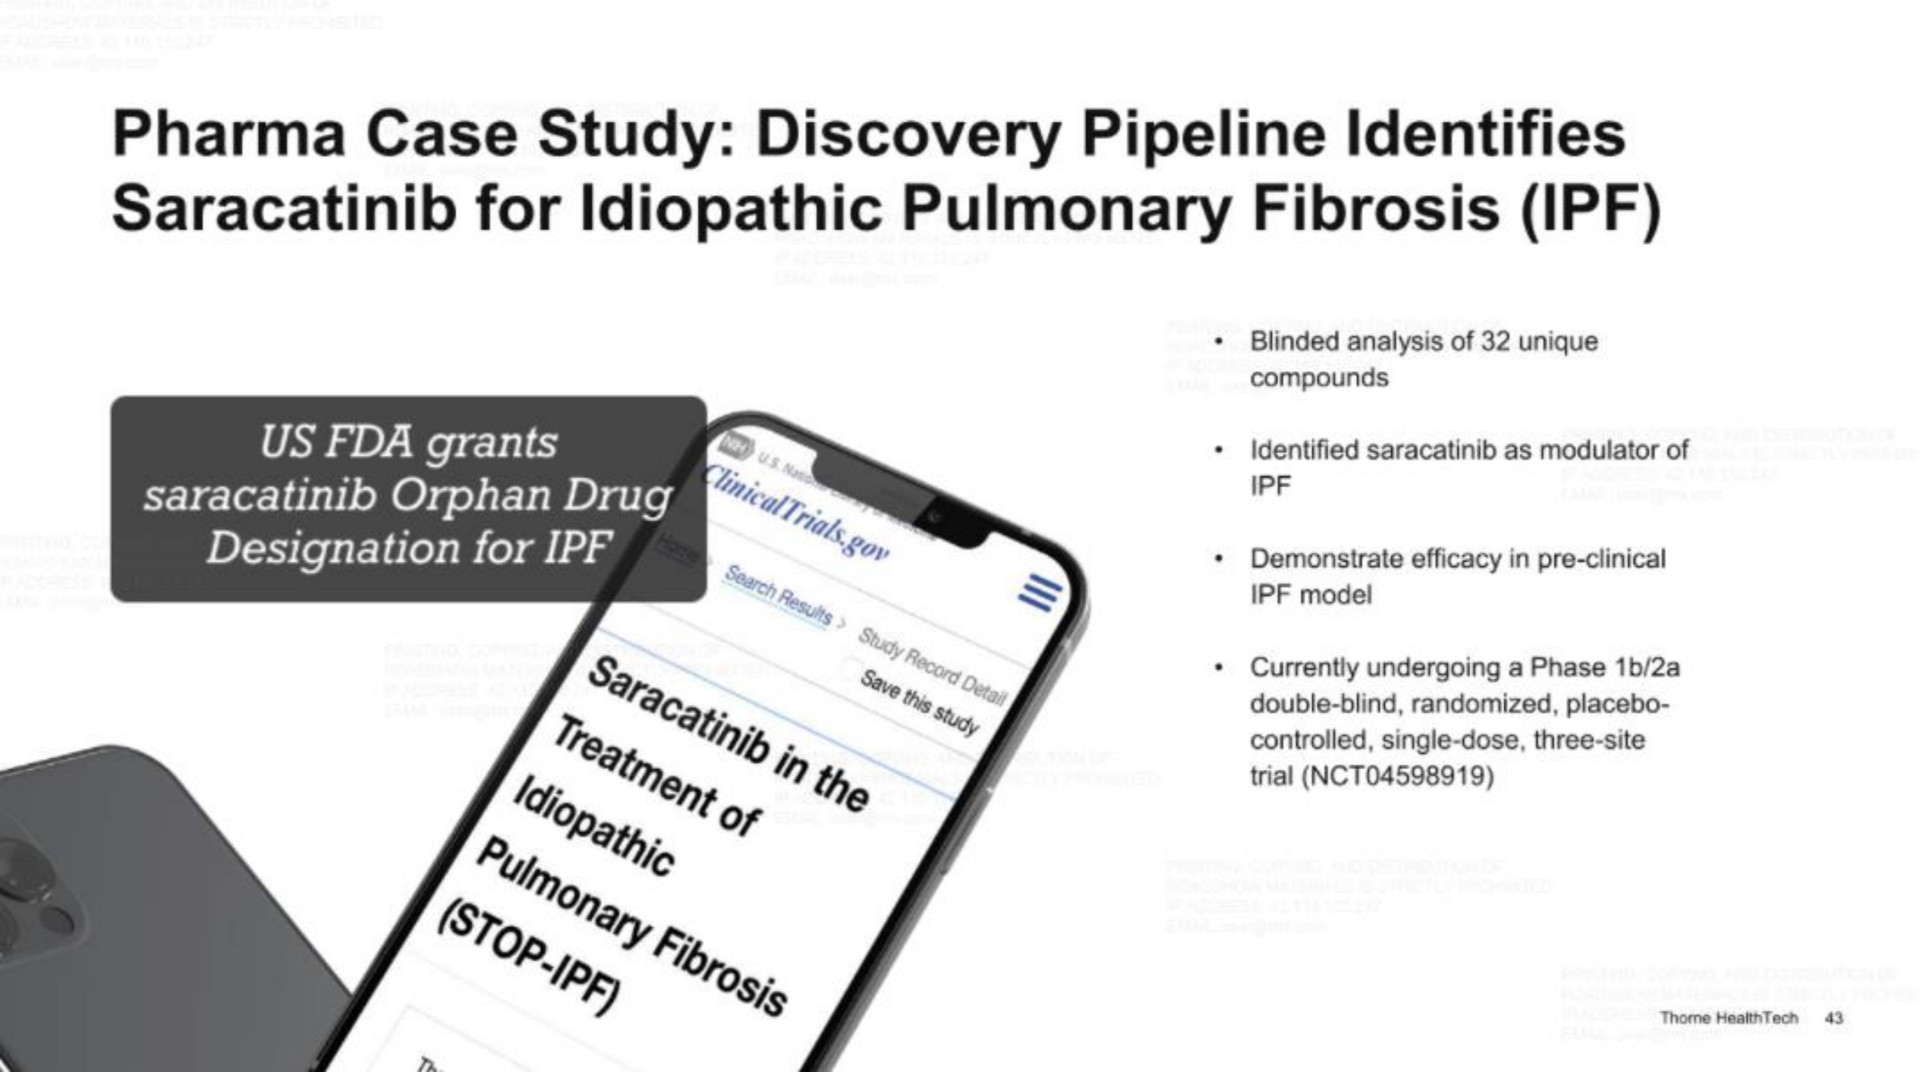 case study discovery pipeline identifies for idiopathic pulmonary fibrosis | Thorne HealthTech